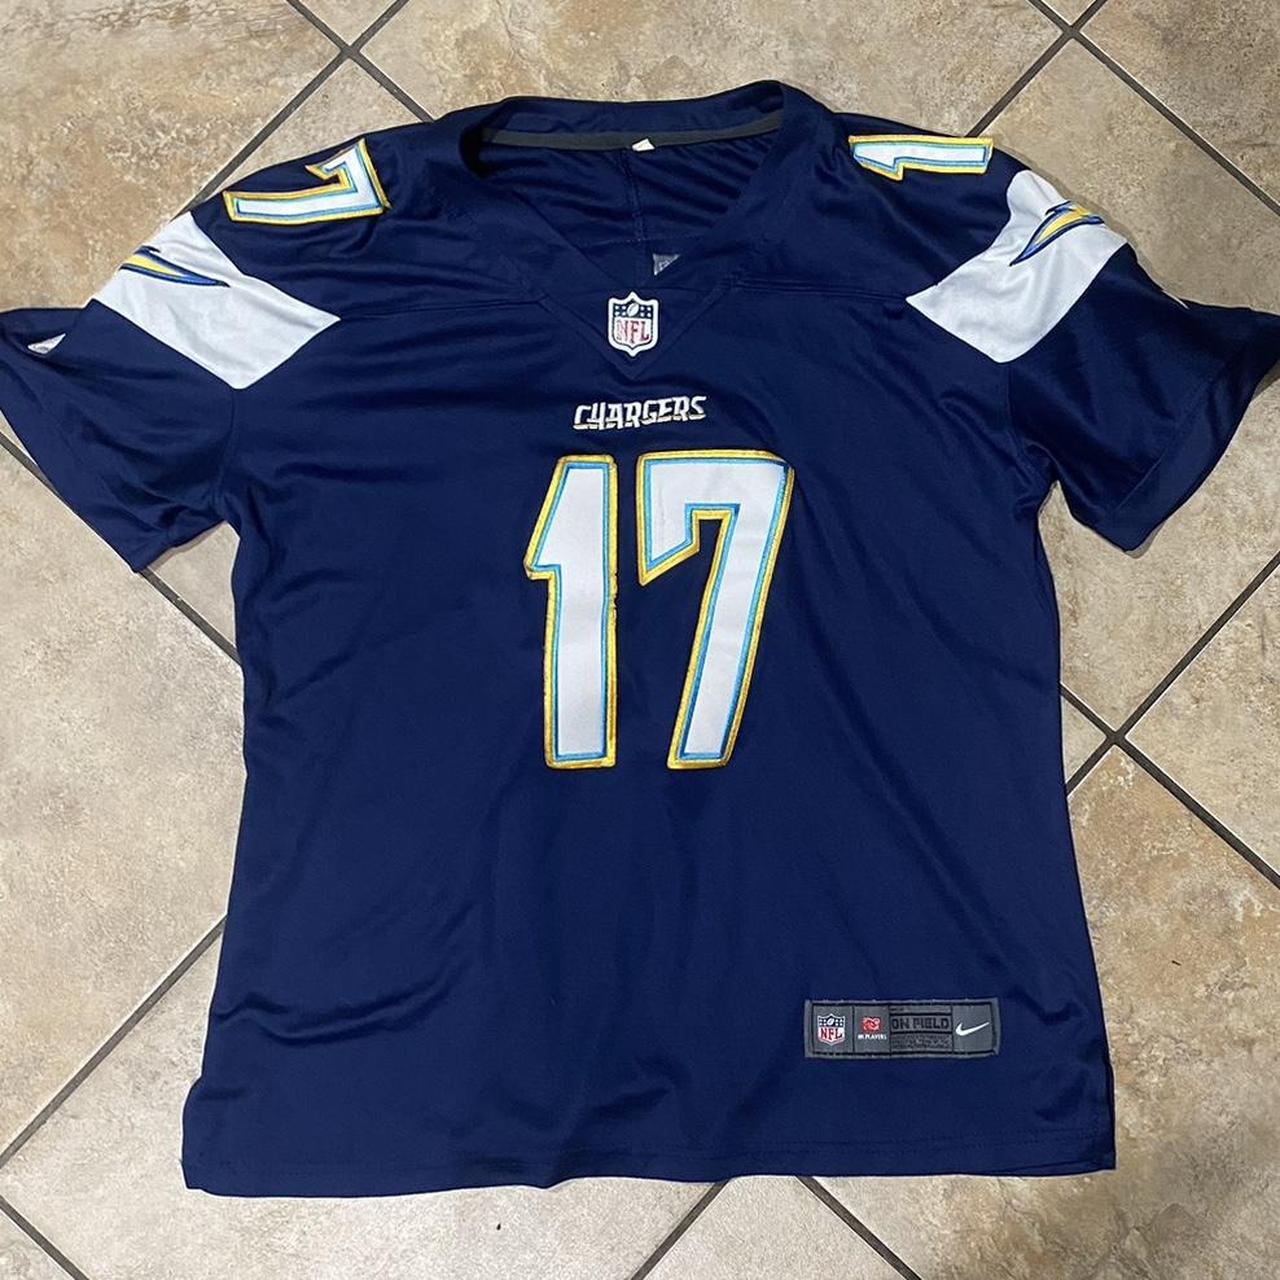 Chargers football jersey Small - Depop